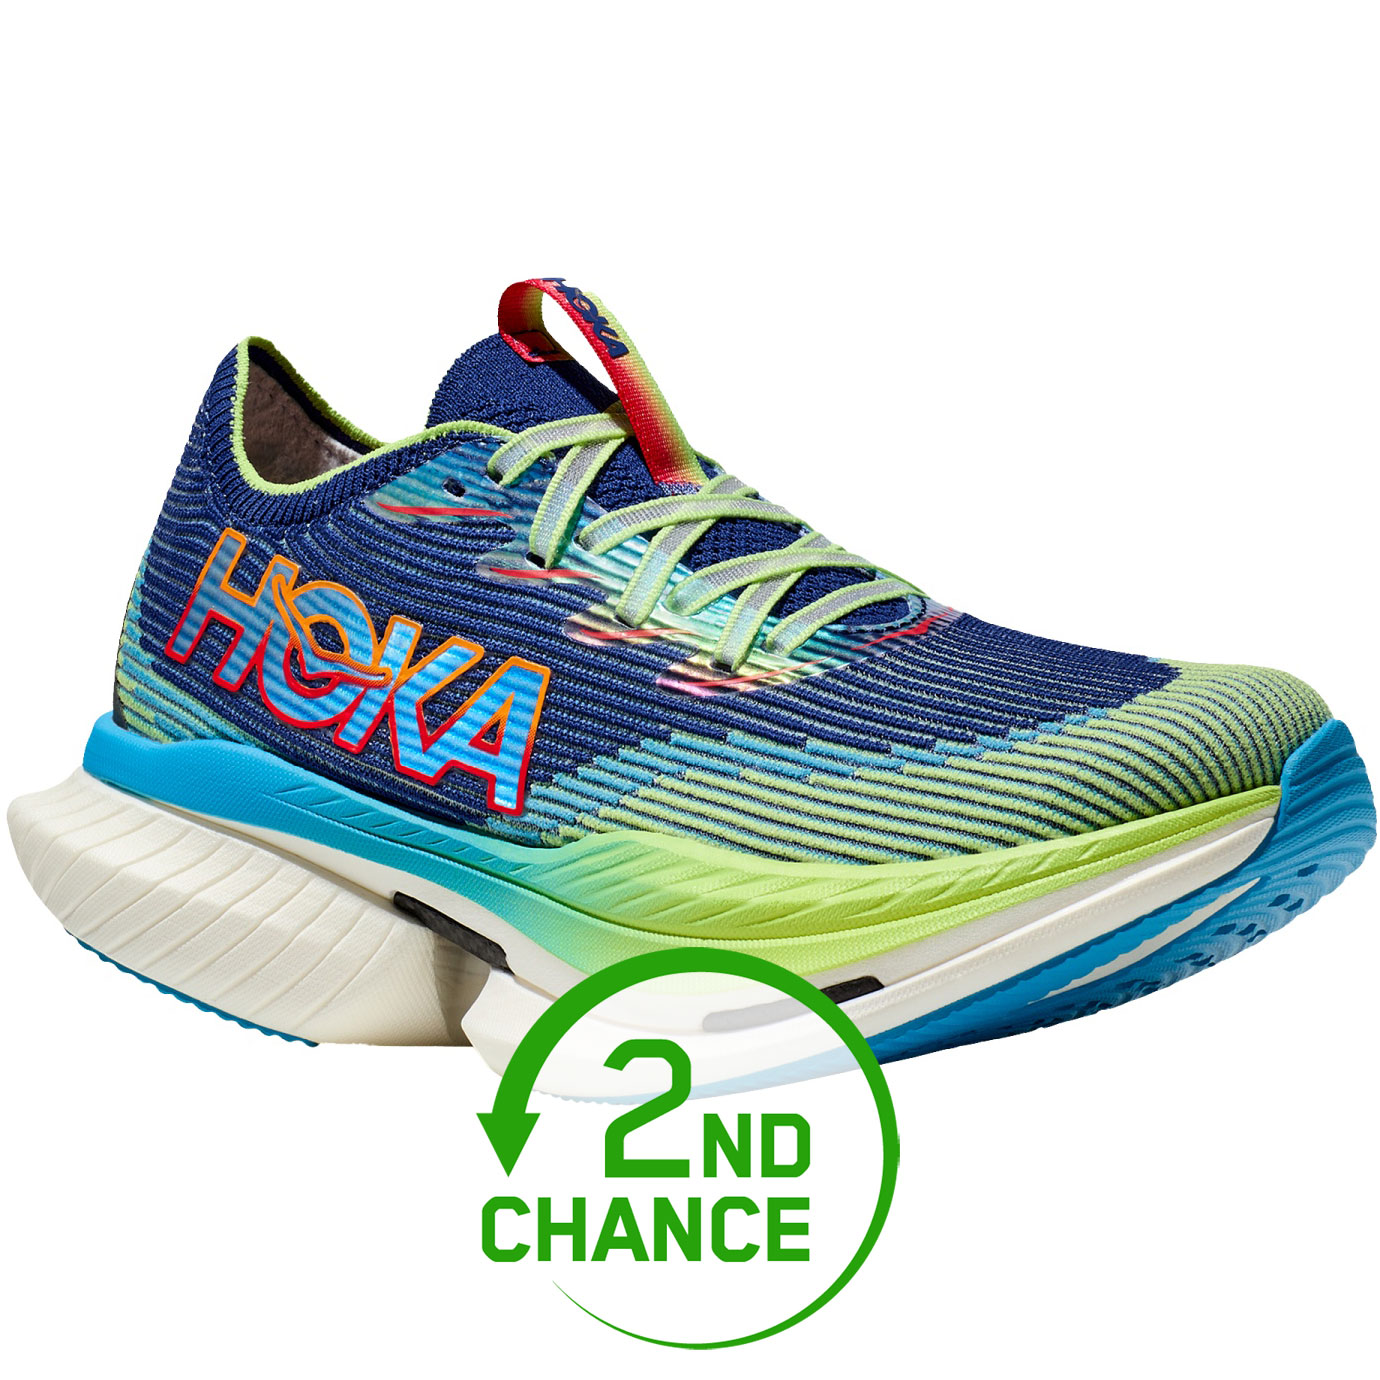 Picture of Hoka Cielo X 1 Running Shoes Unisex - evening sky / lettuce - 2nd Choice